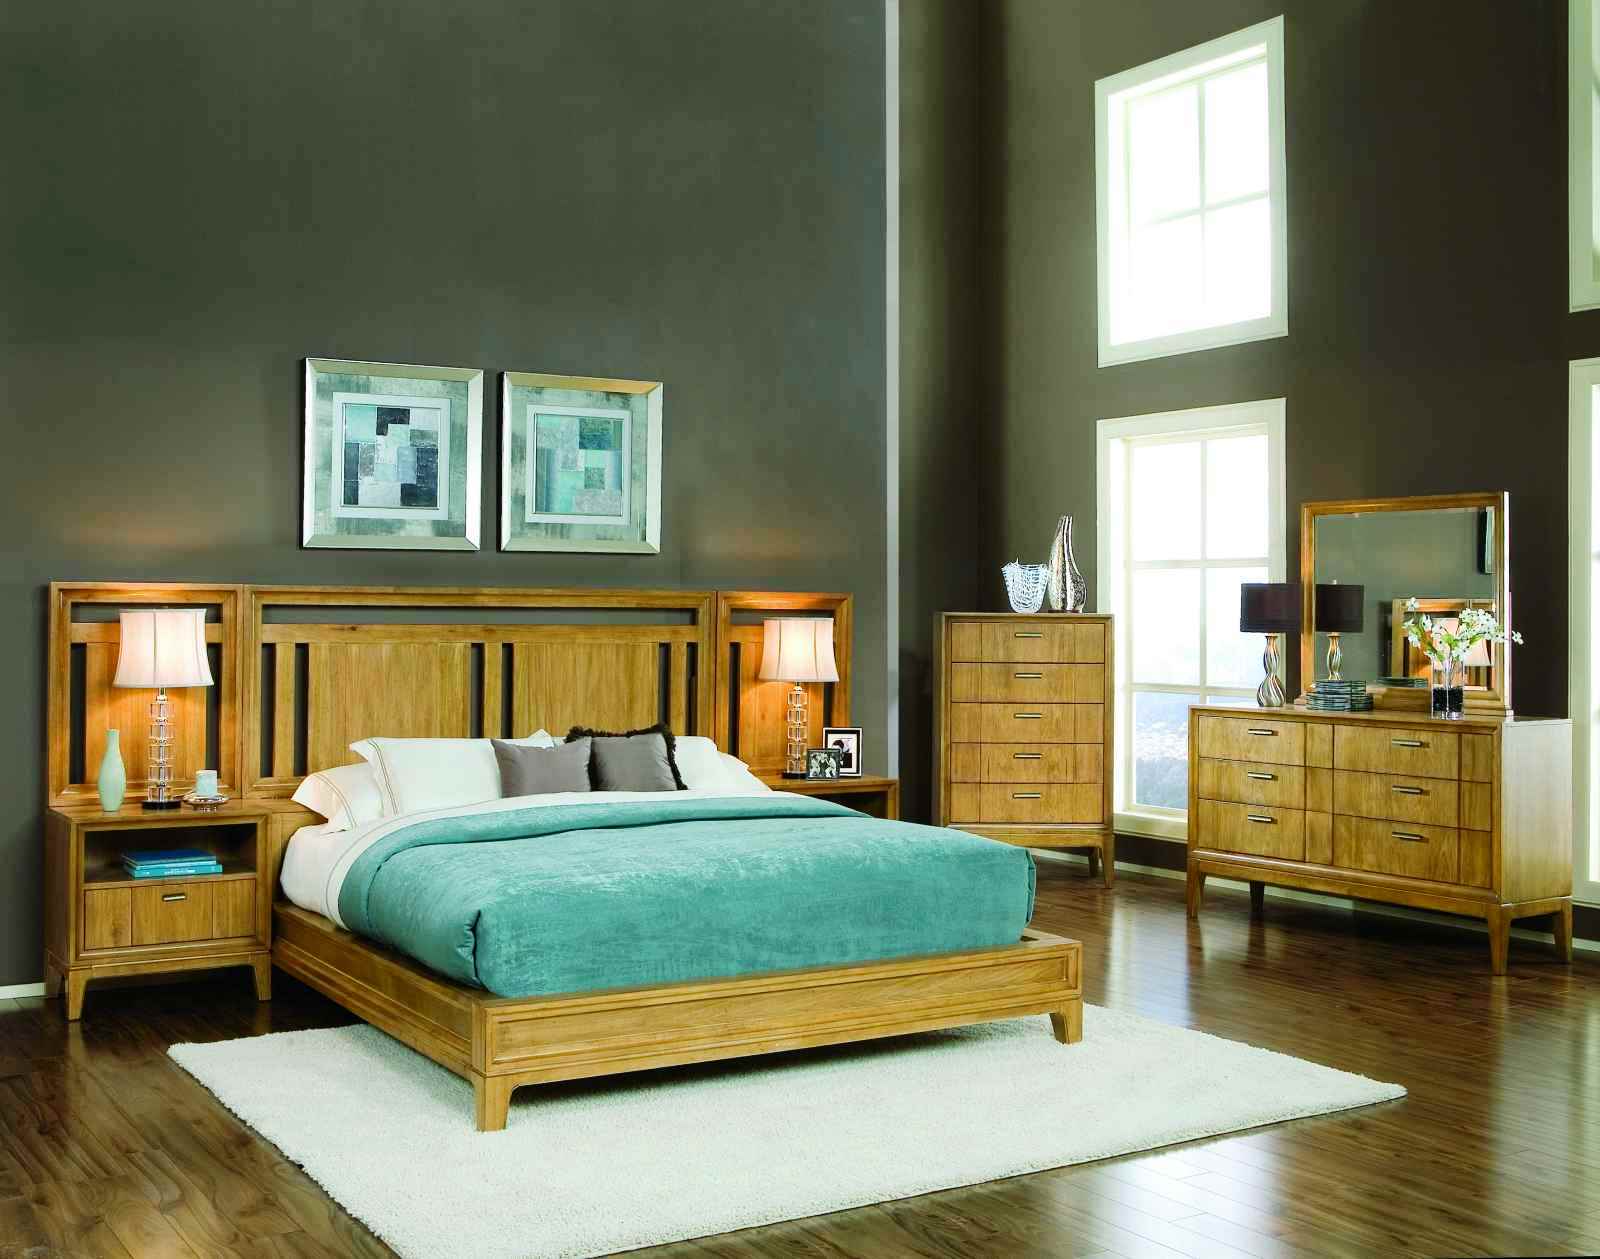 Things To Consider From Buying The Inexpensive Bedroom Furniture